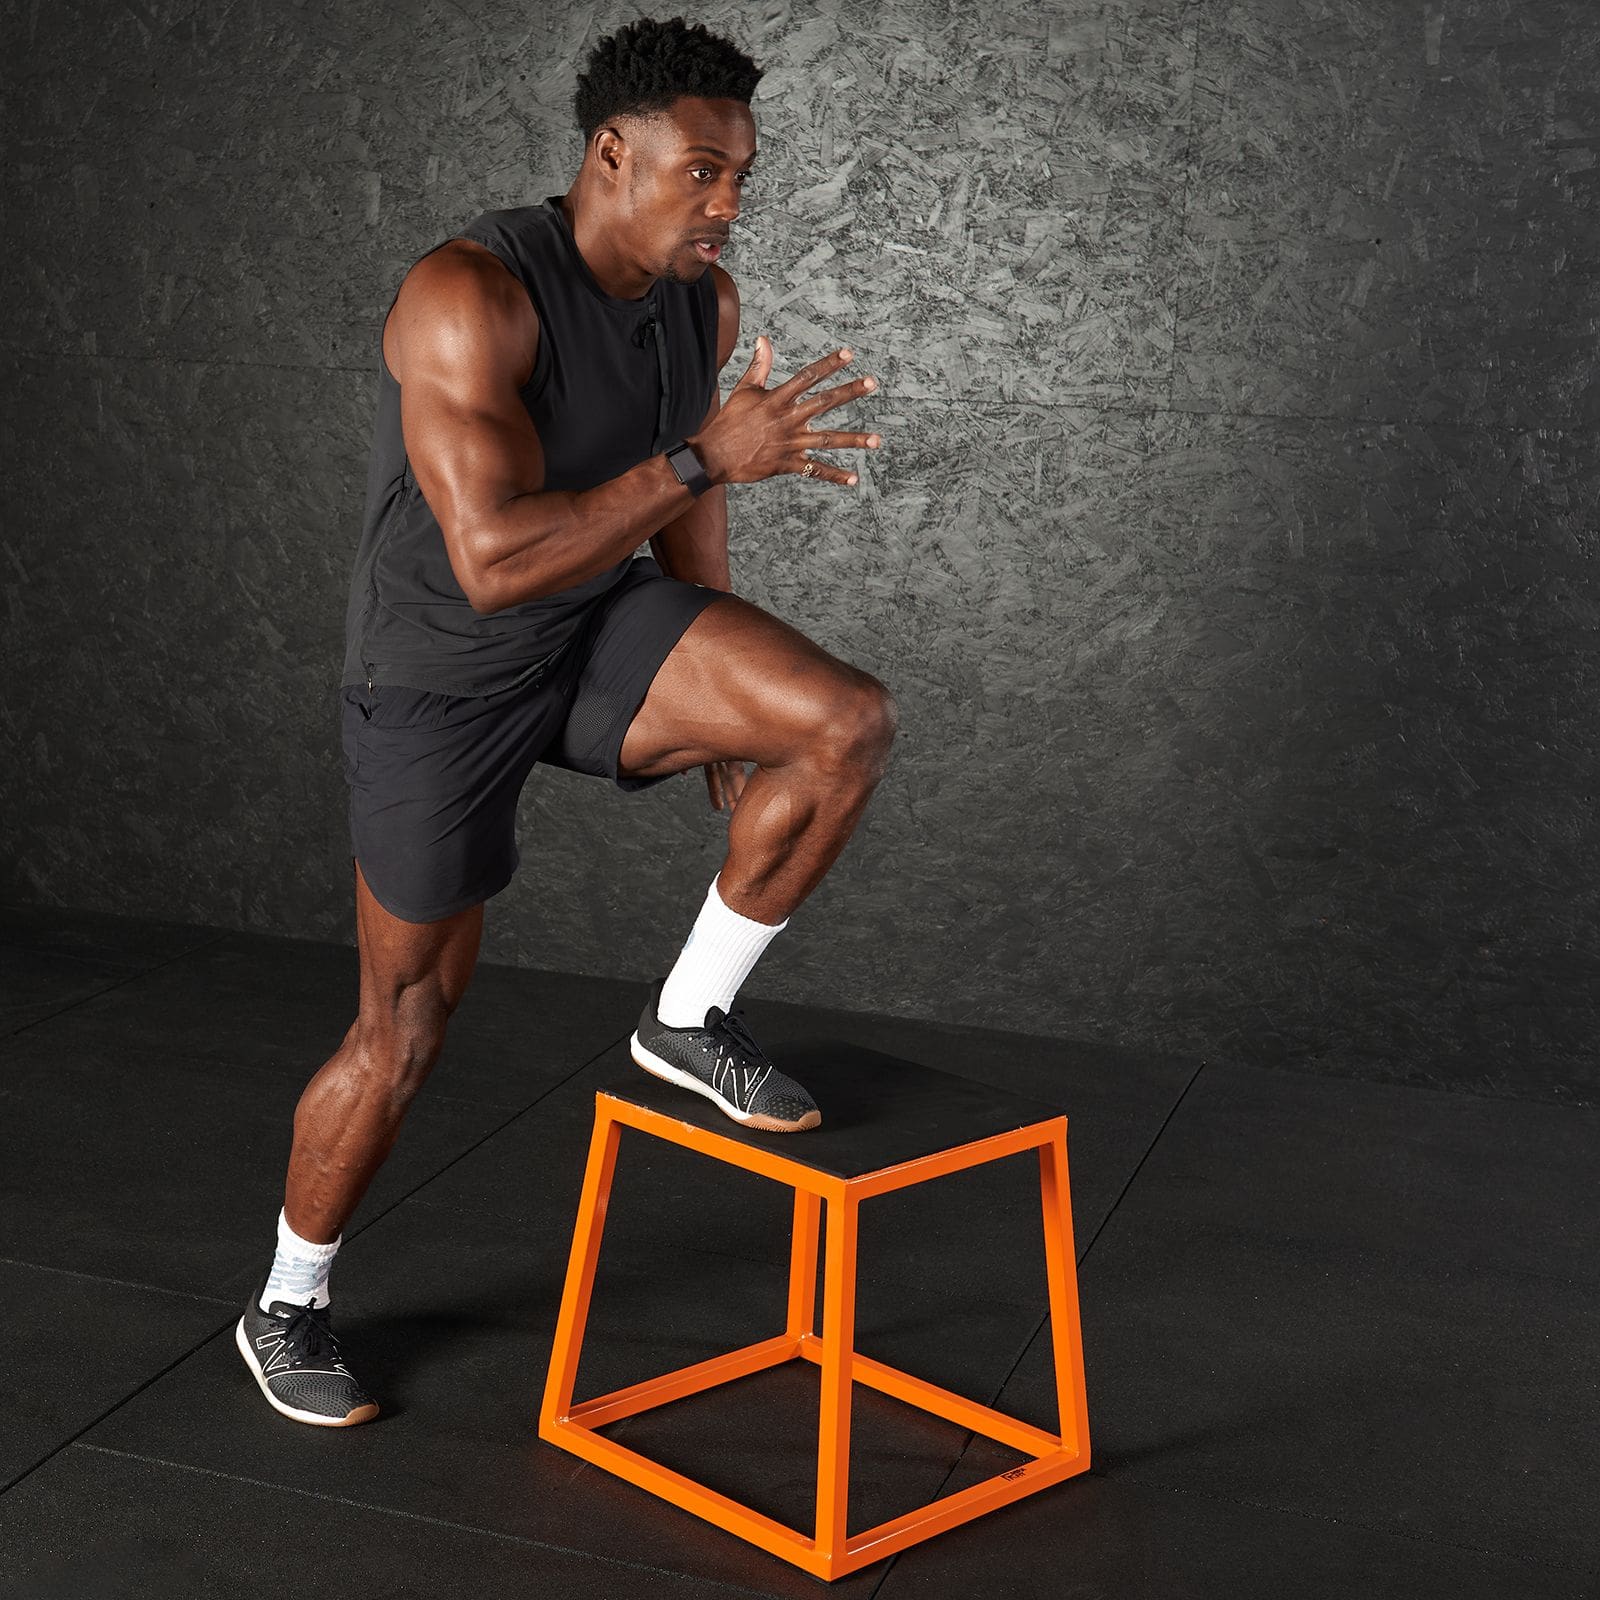 Mirafit Steel Plyo Jump Box Small in Use - Review